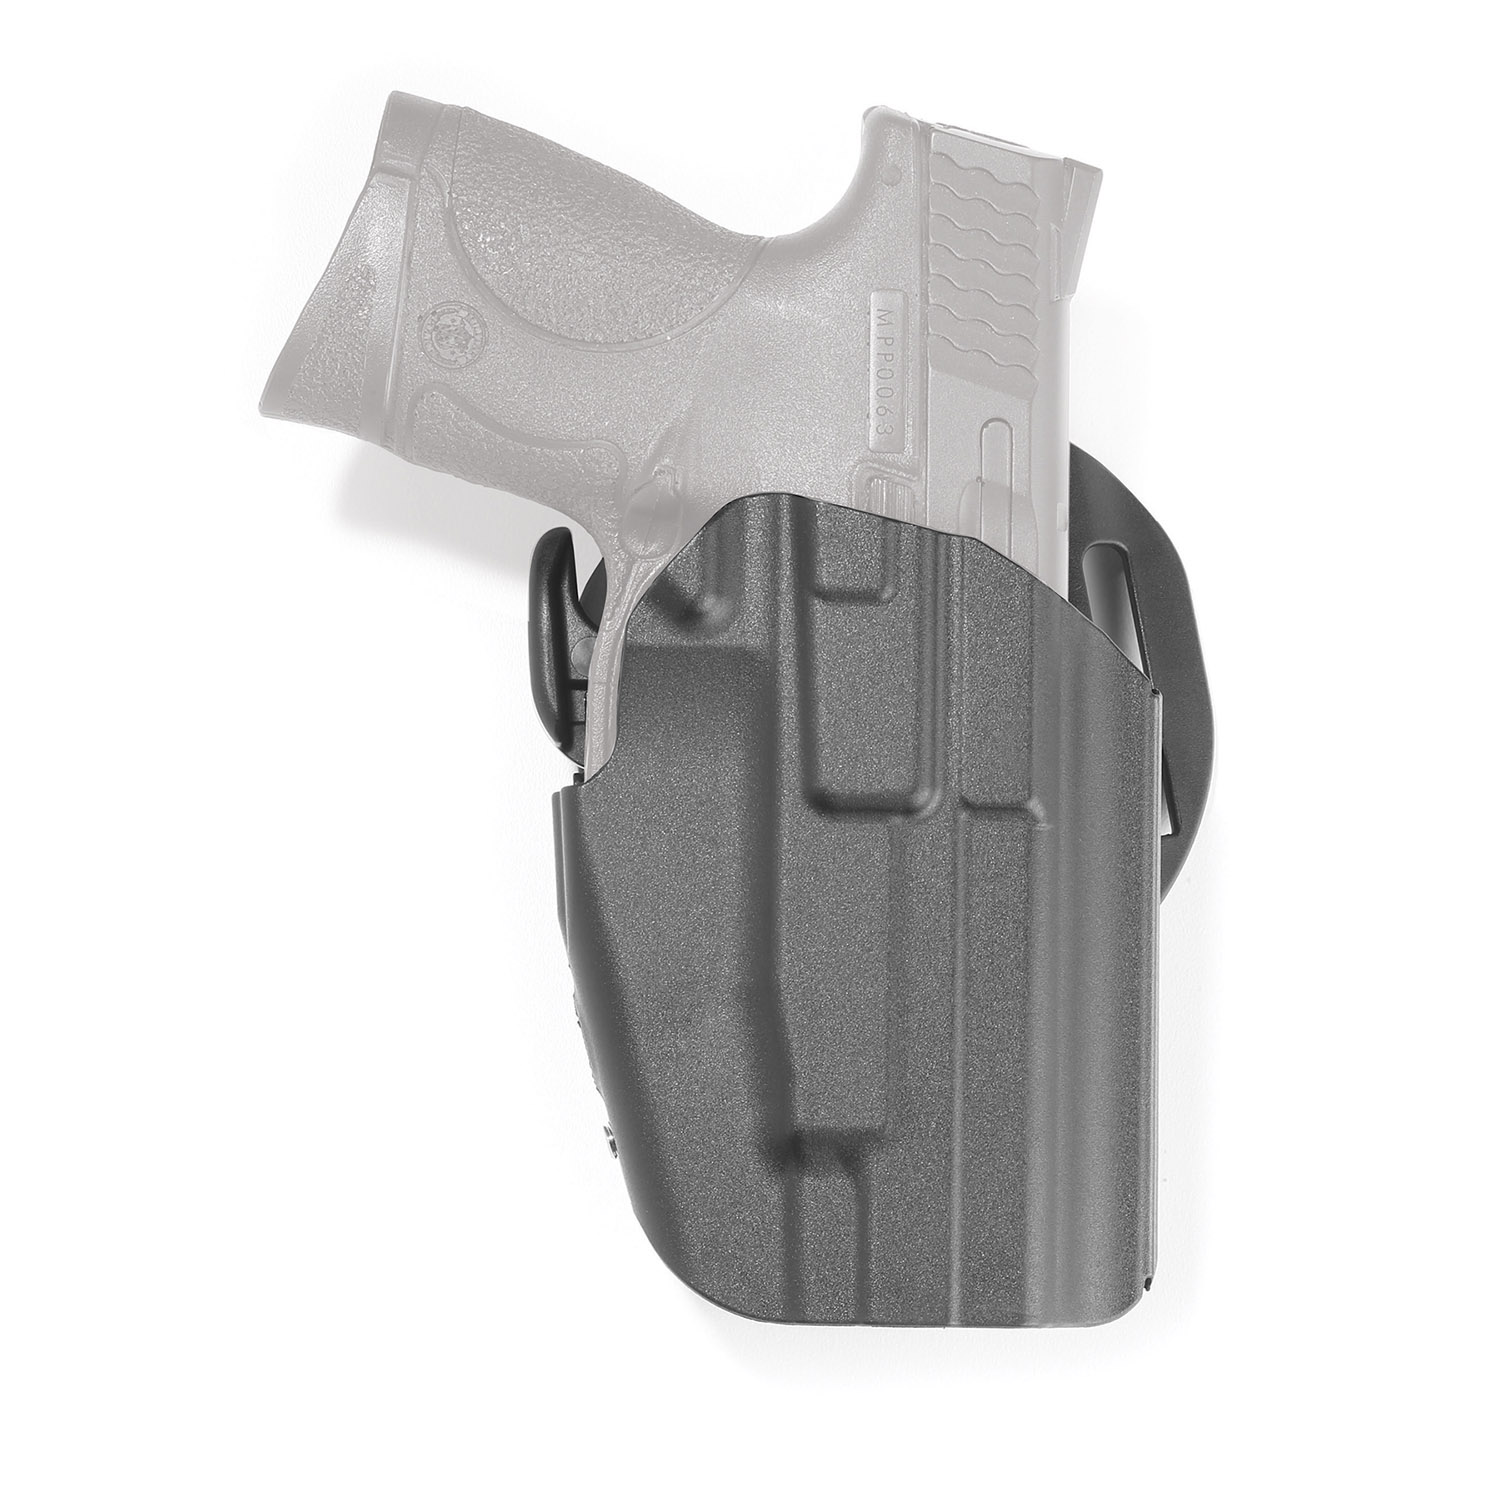 Safariland 576 GLS Pro-Fit Concealable Holster